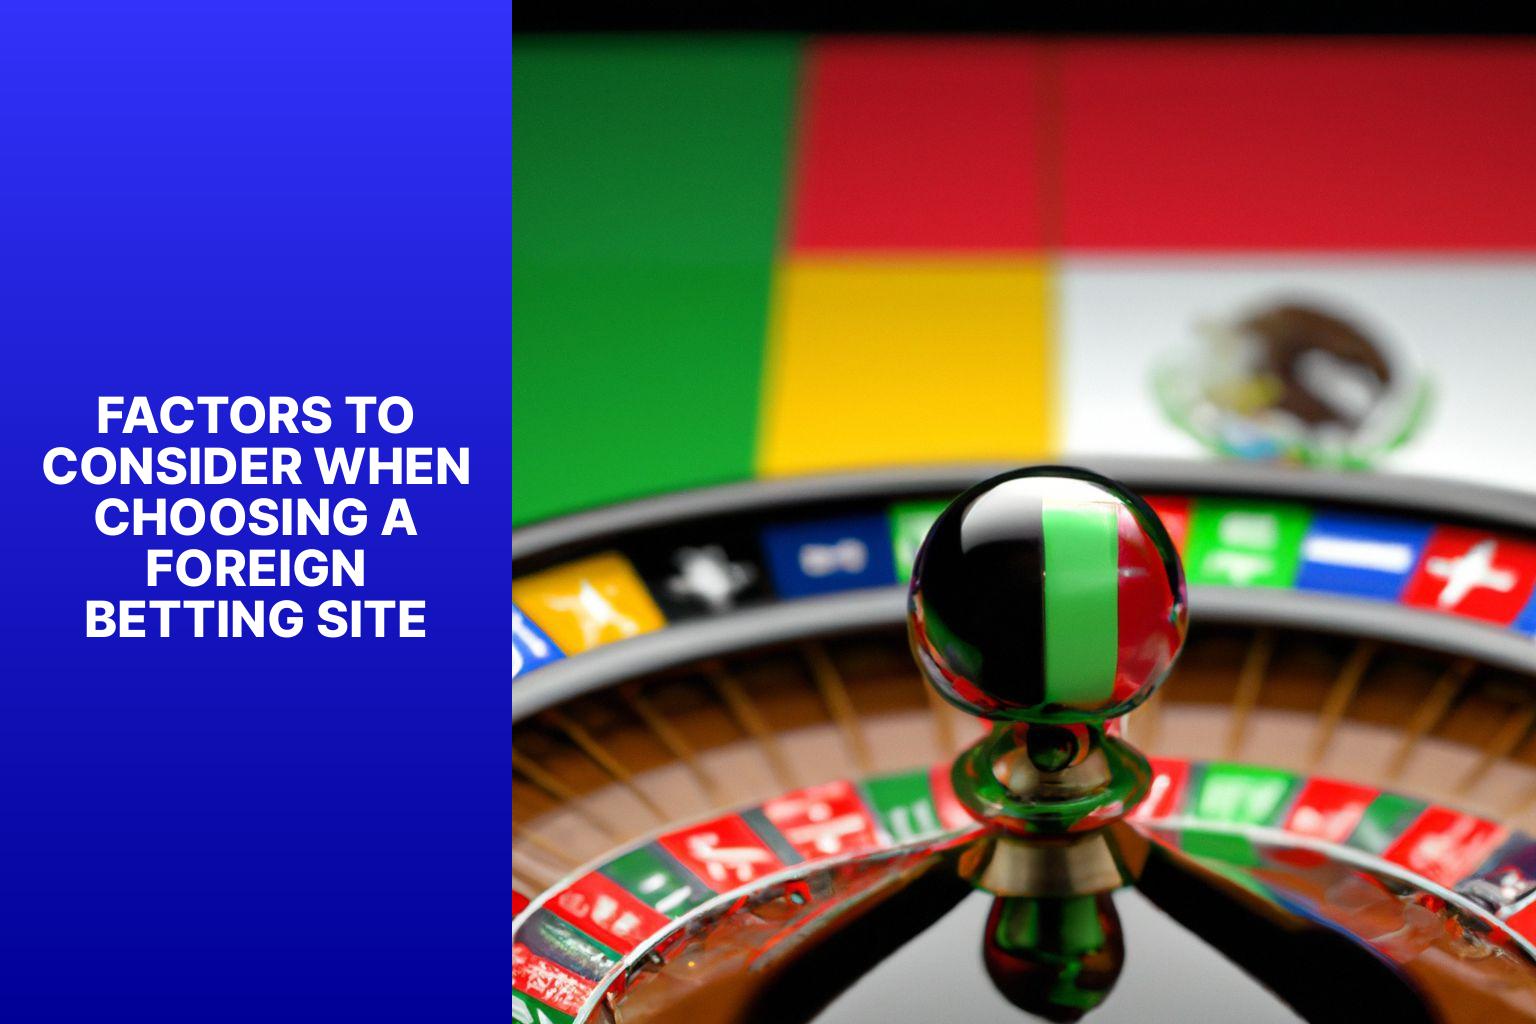 Factors to Consider When Choosing a Foreign Betting Site - Foreign Betting Sites That Accept Nigeria: Where Nigerians Can Wager 